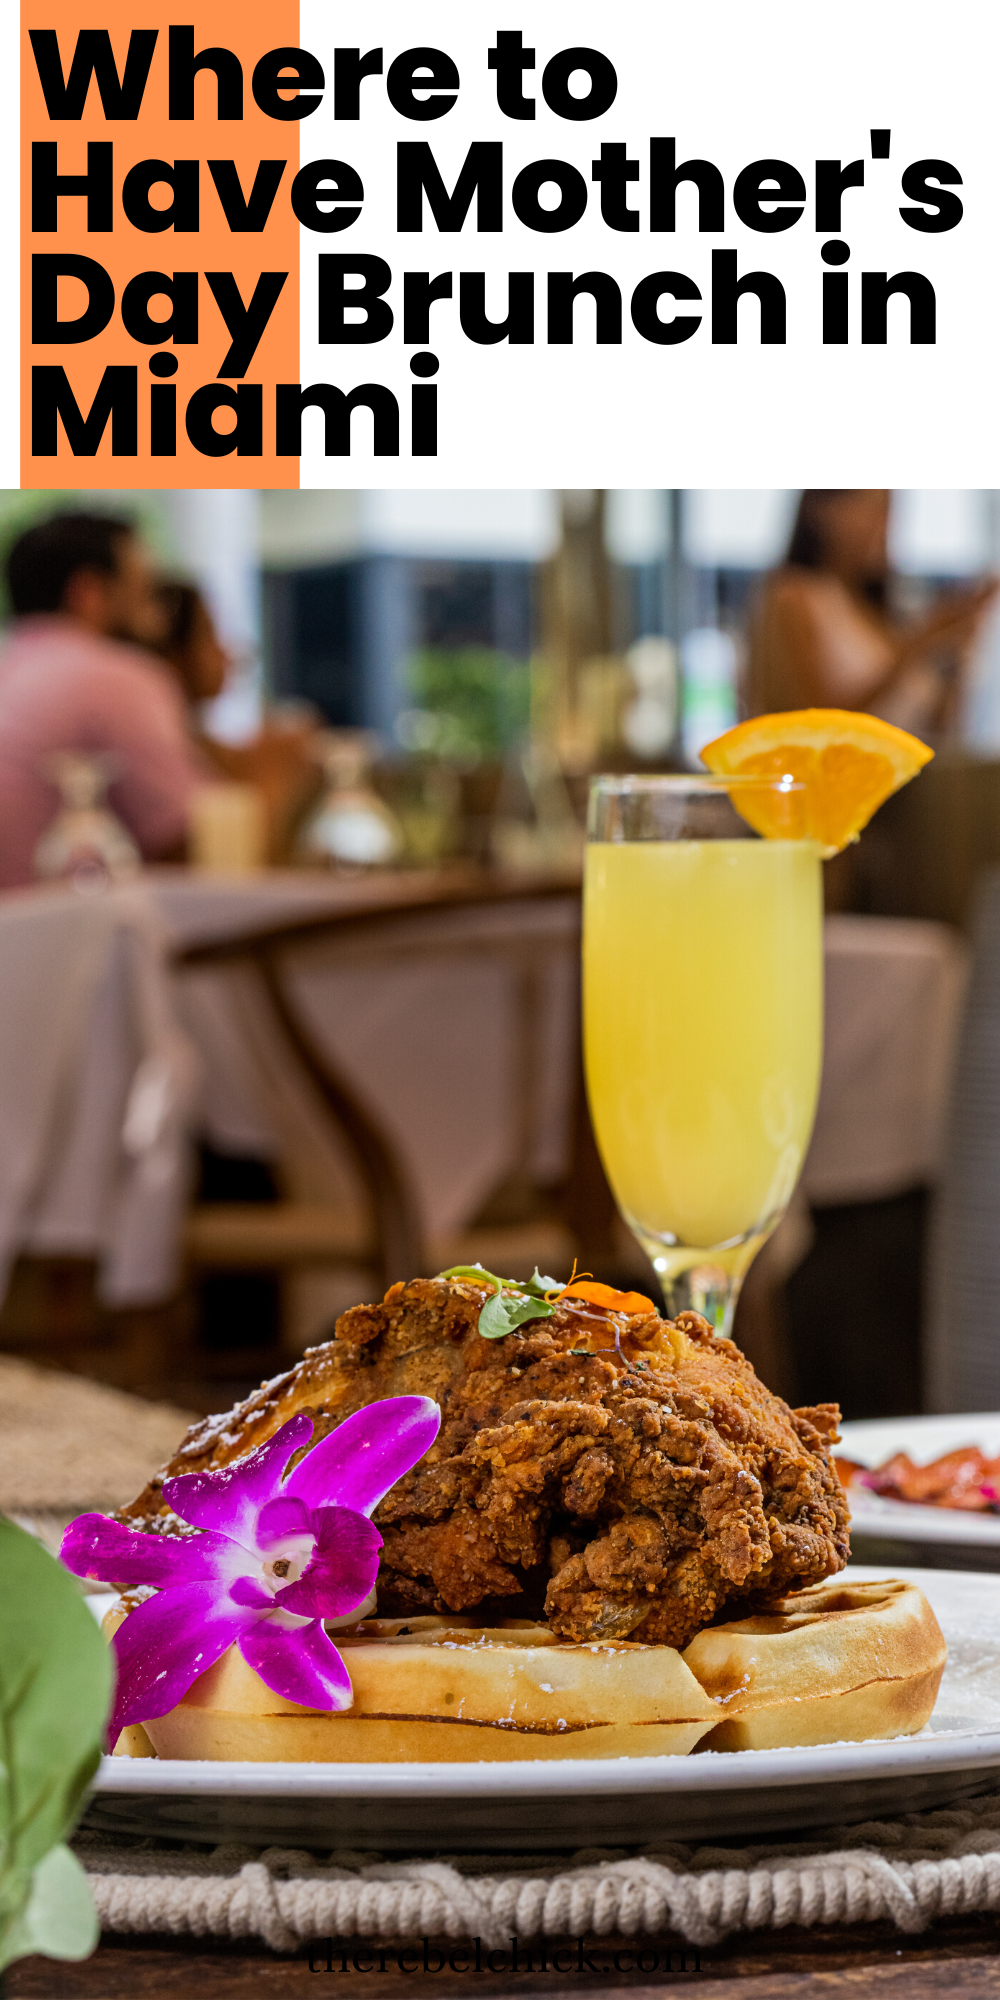 Where to Have Mother's Day Brunch in Miami